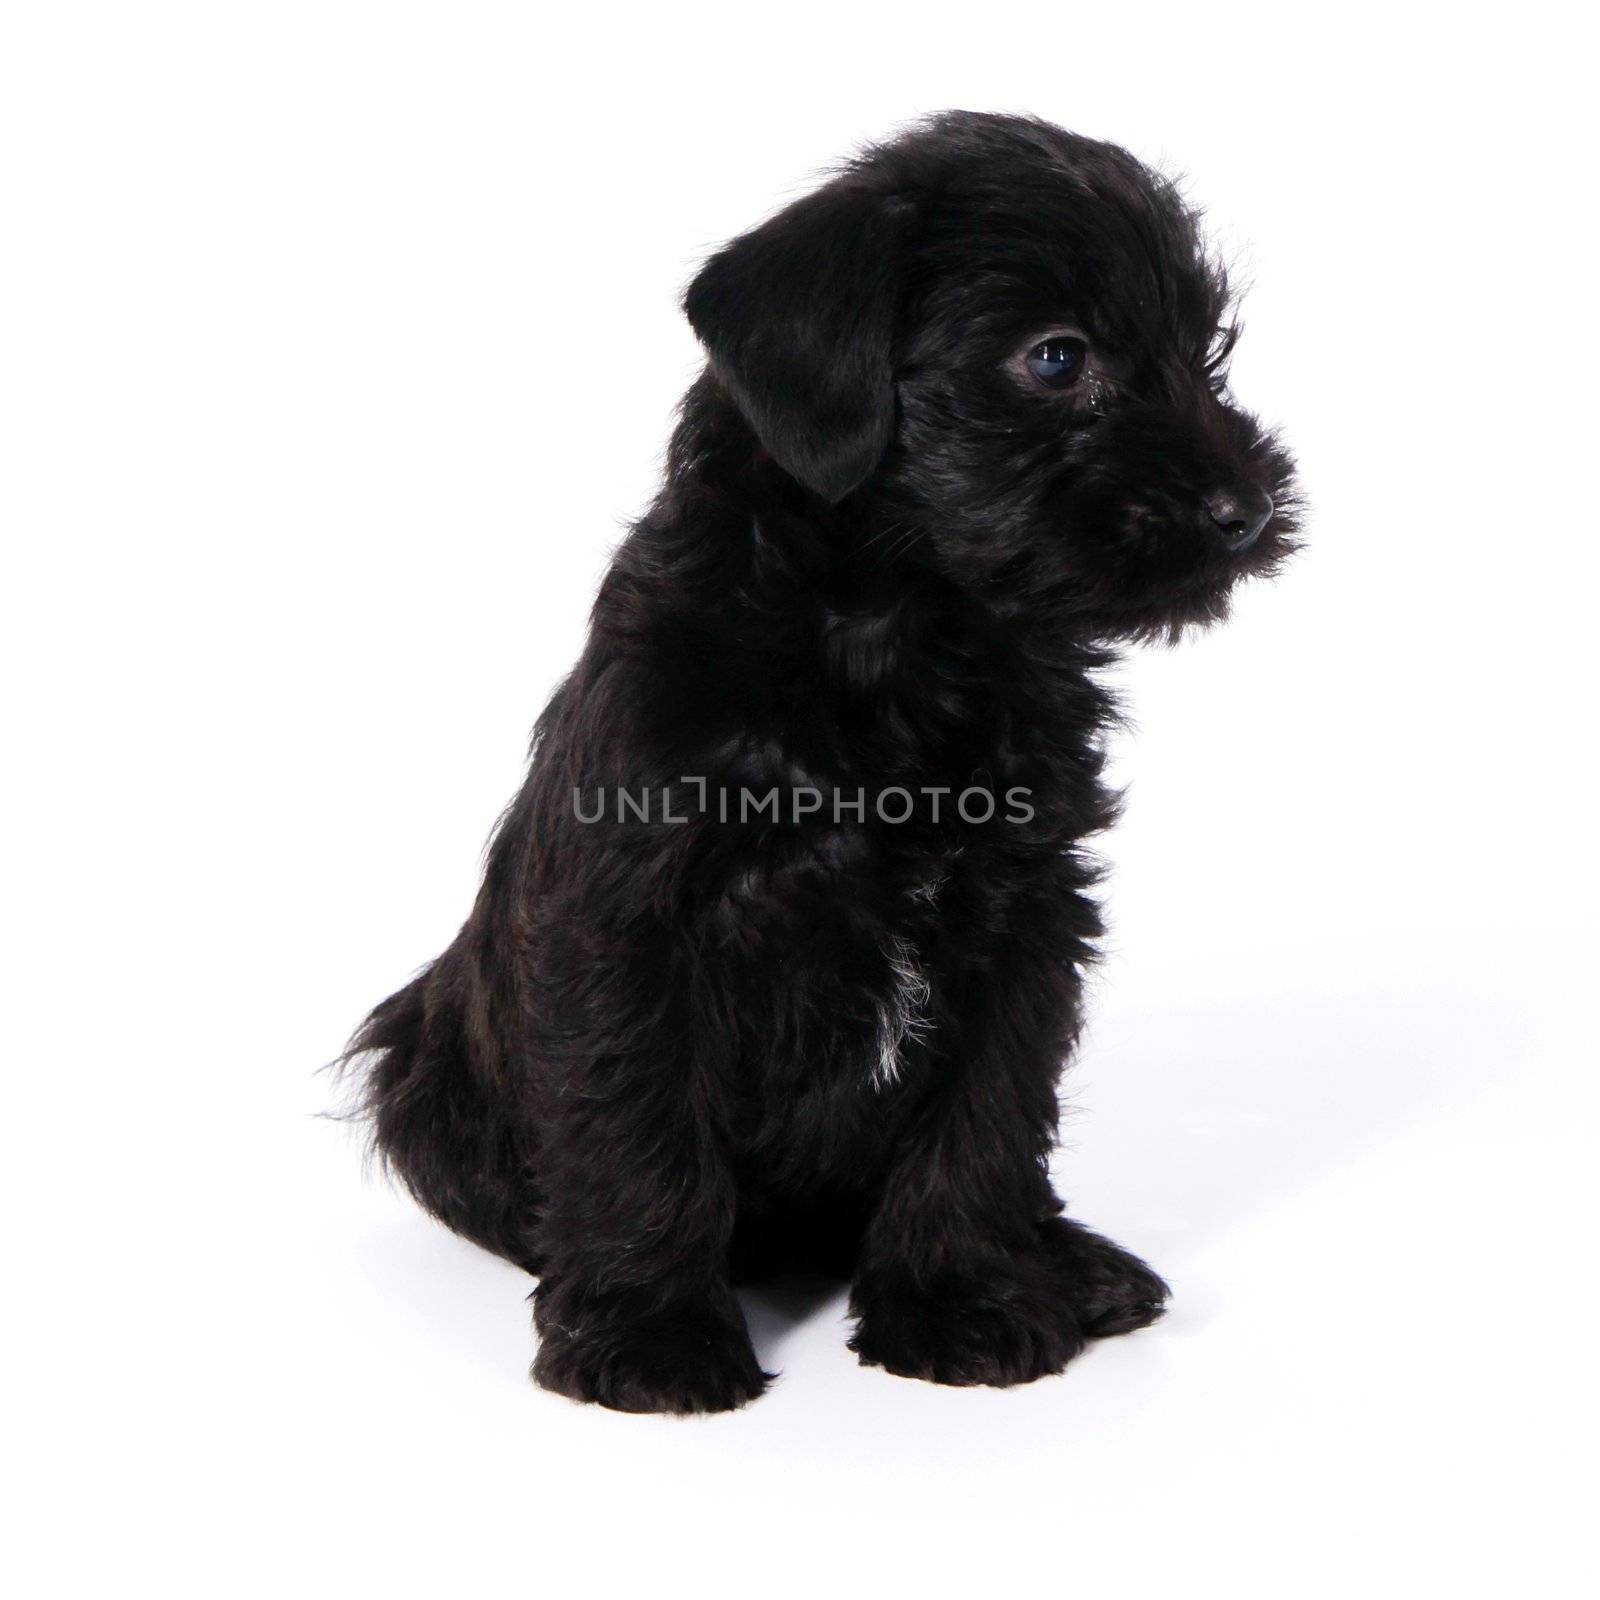 little puppies isolated on a white background